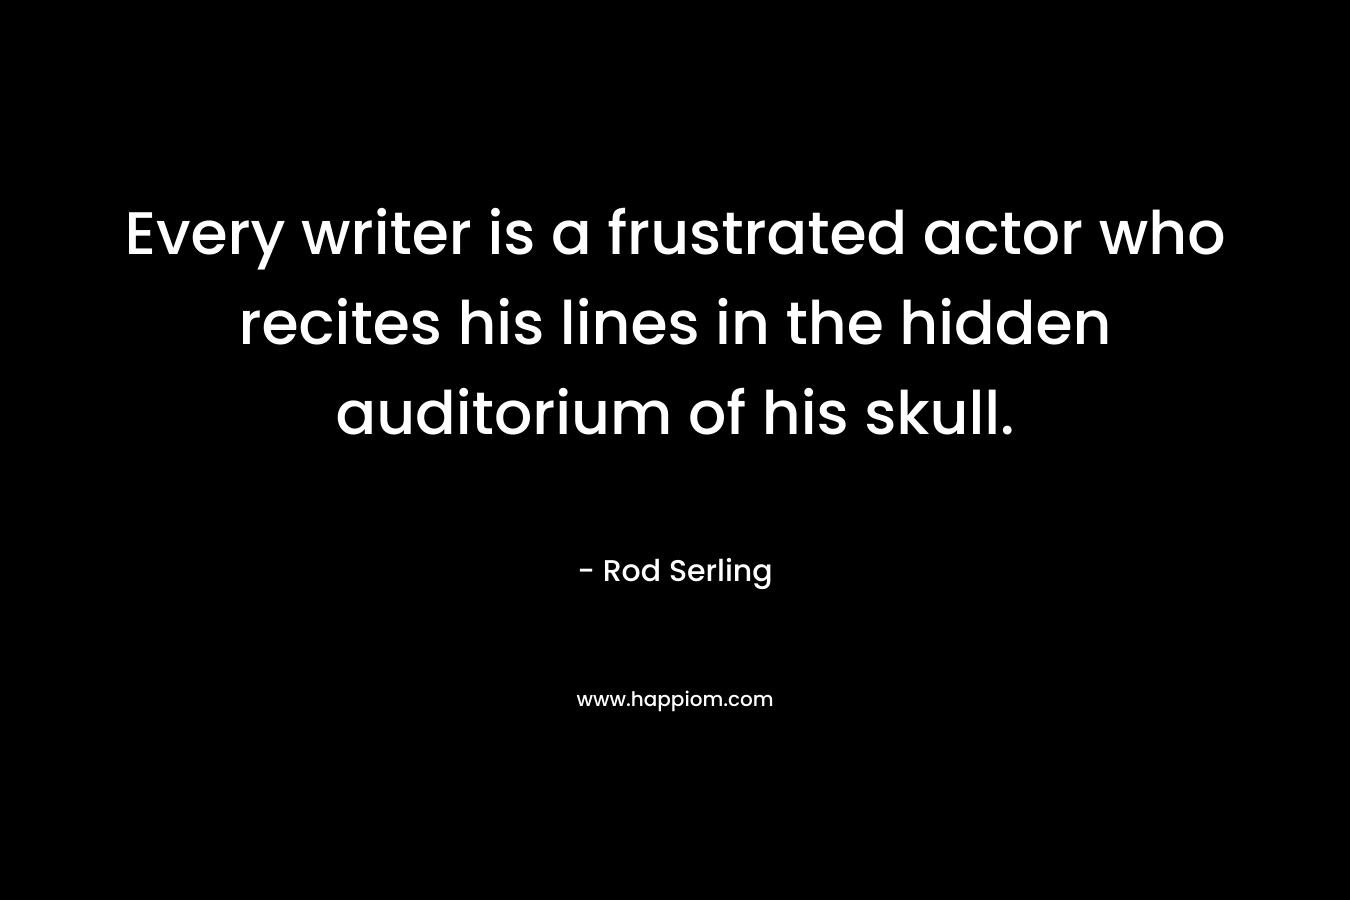 Every writer is a frustrated actor who recites his lines in the hidden auditorium of his skull. – Rod Serling